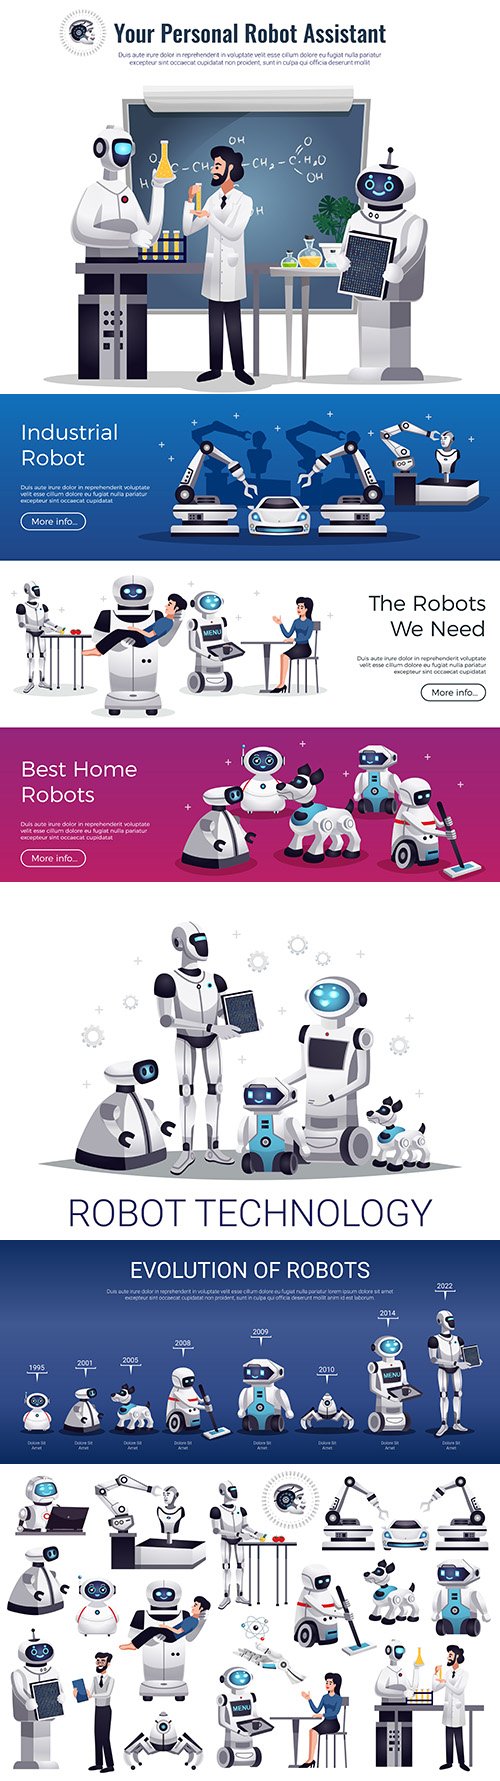 Evolution of robots and robotics collection banners